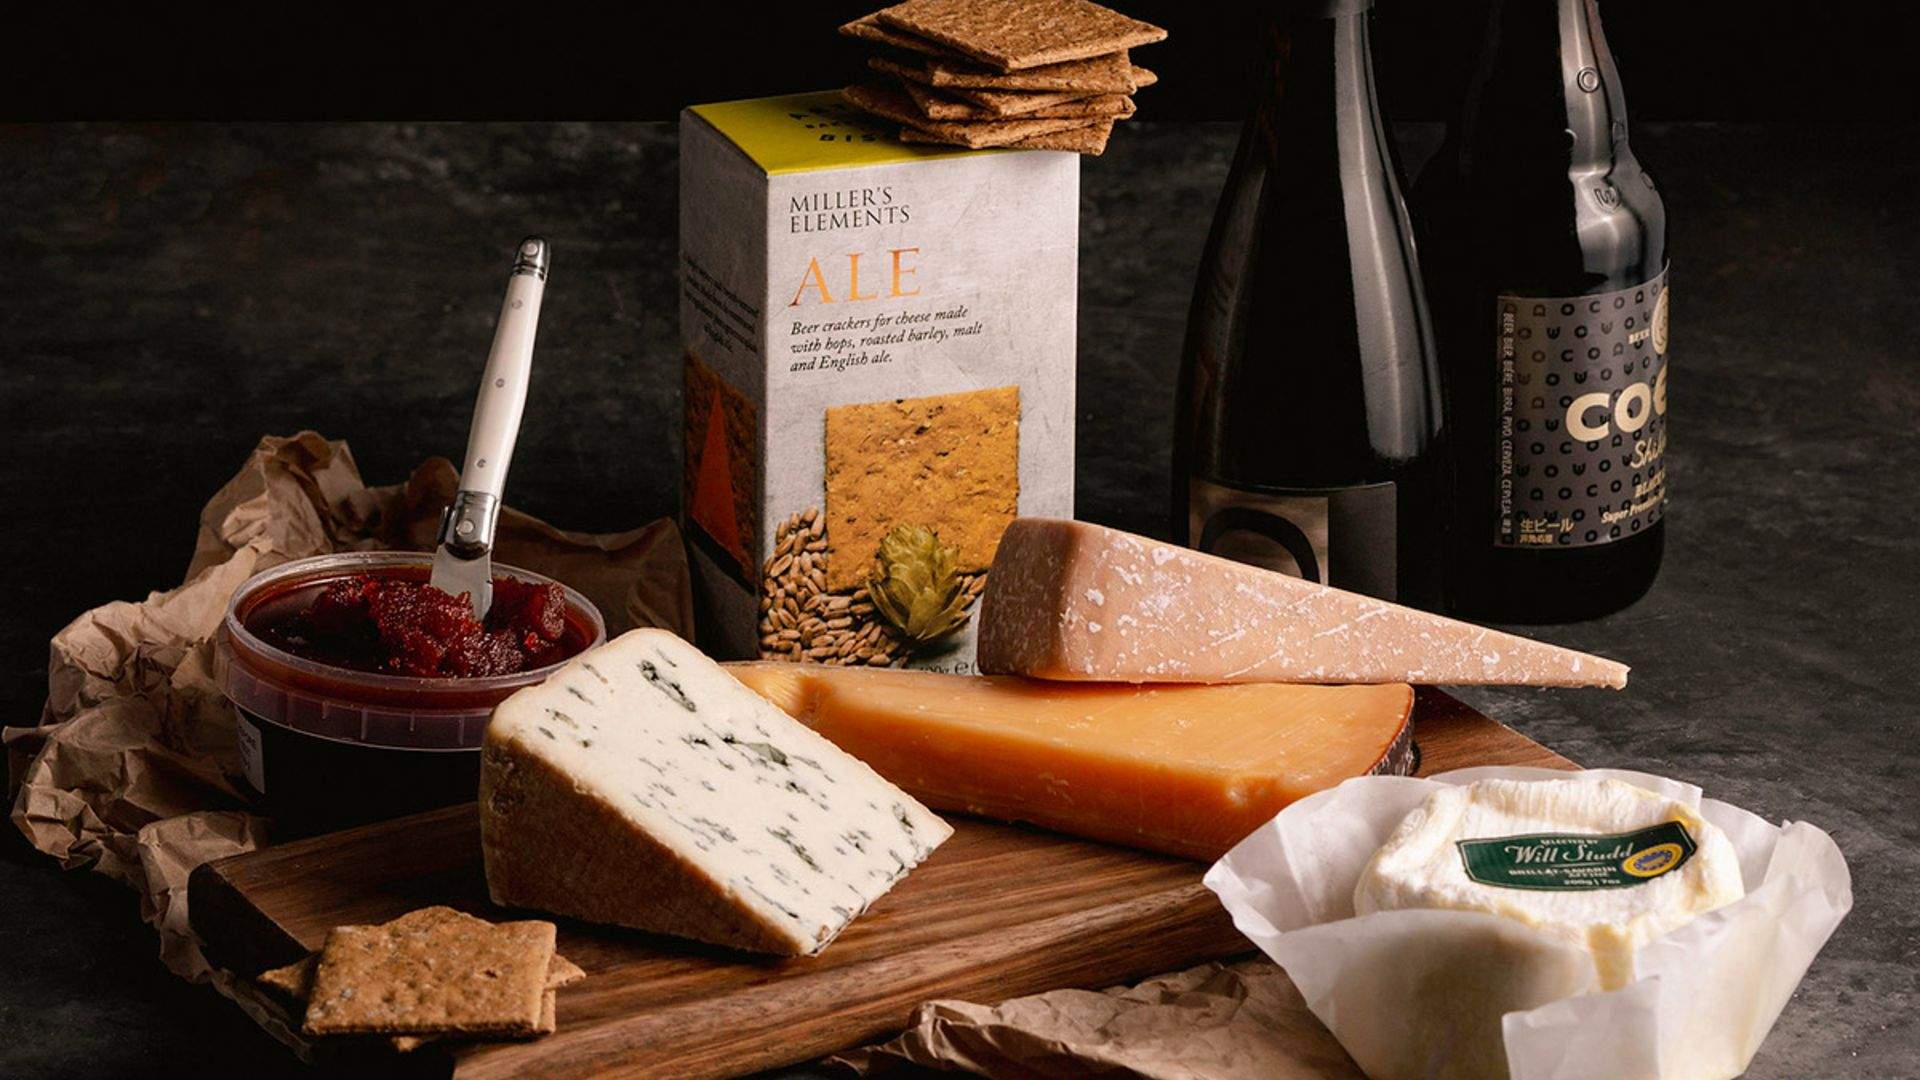 Seven Melbourne Spots Delivering Next-Level Wine and Cheese Packs to Your Couch